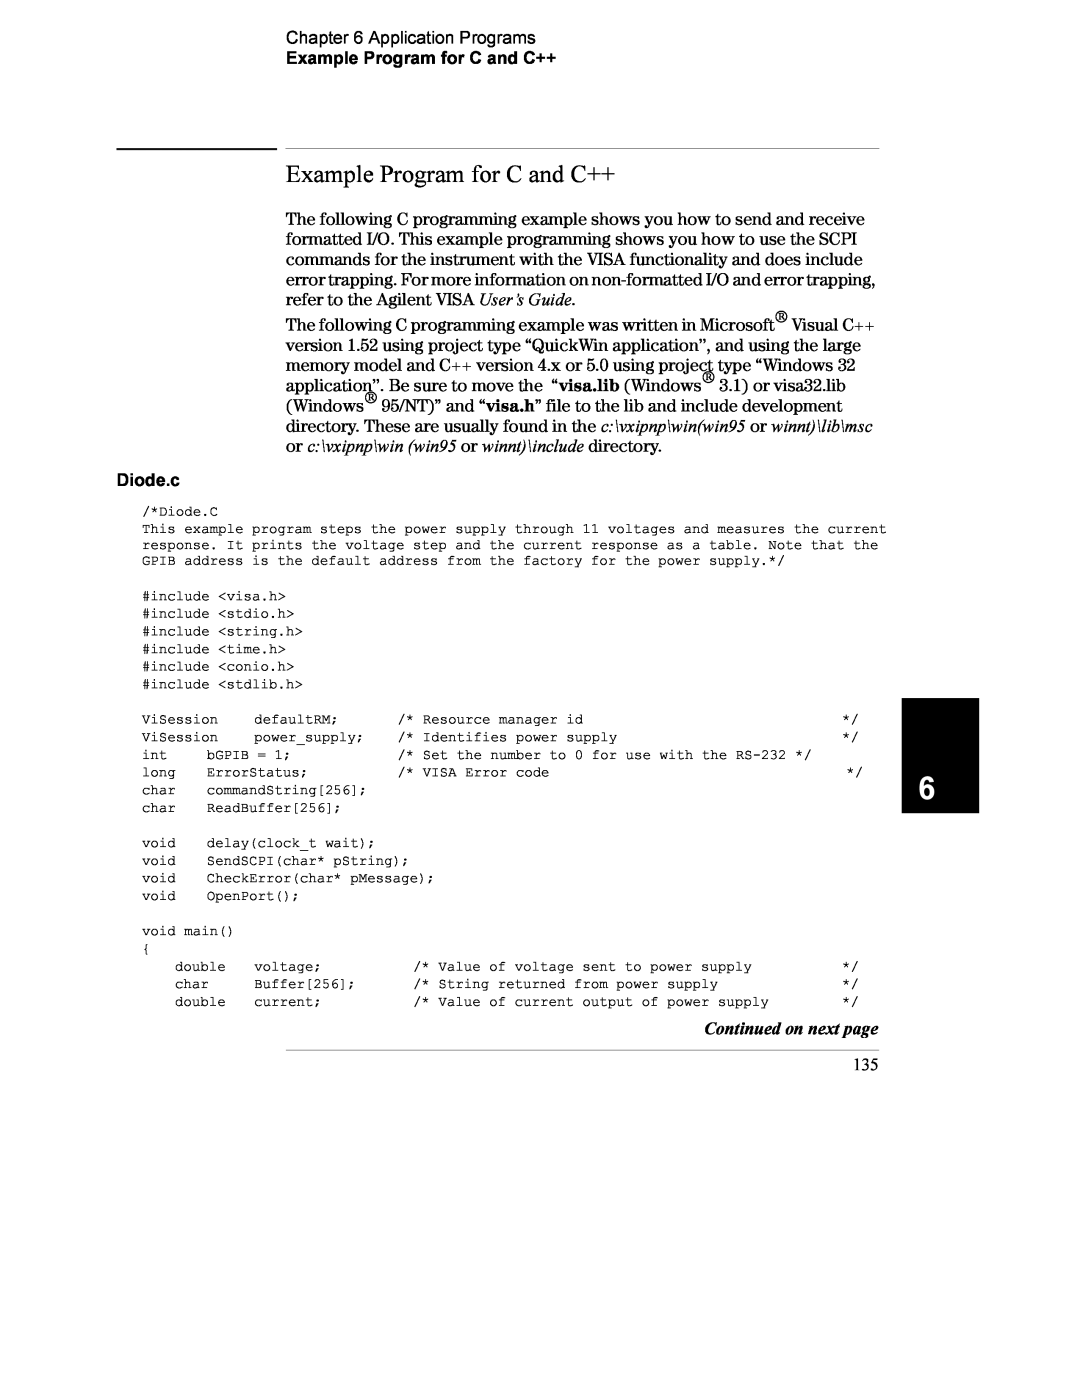 Agilent Technologies E3633A Application Programs Example Program for C and C++, Diode.c, Continued on next page 135 